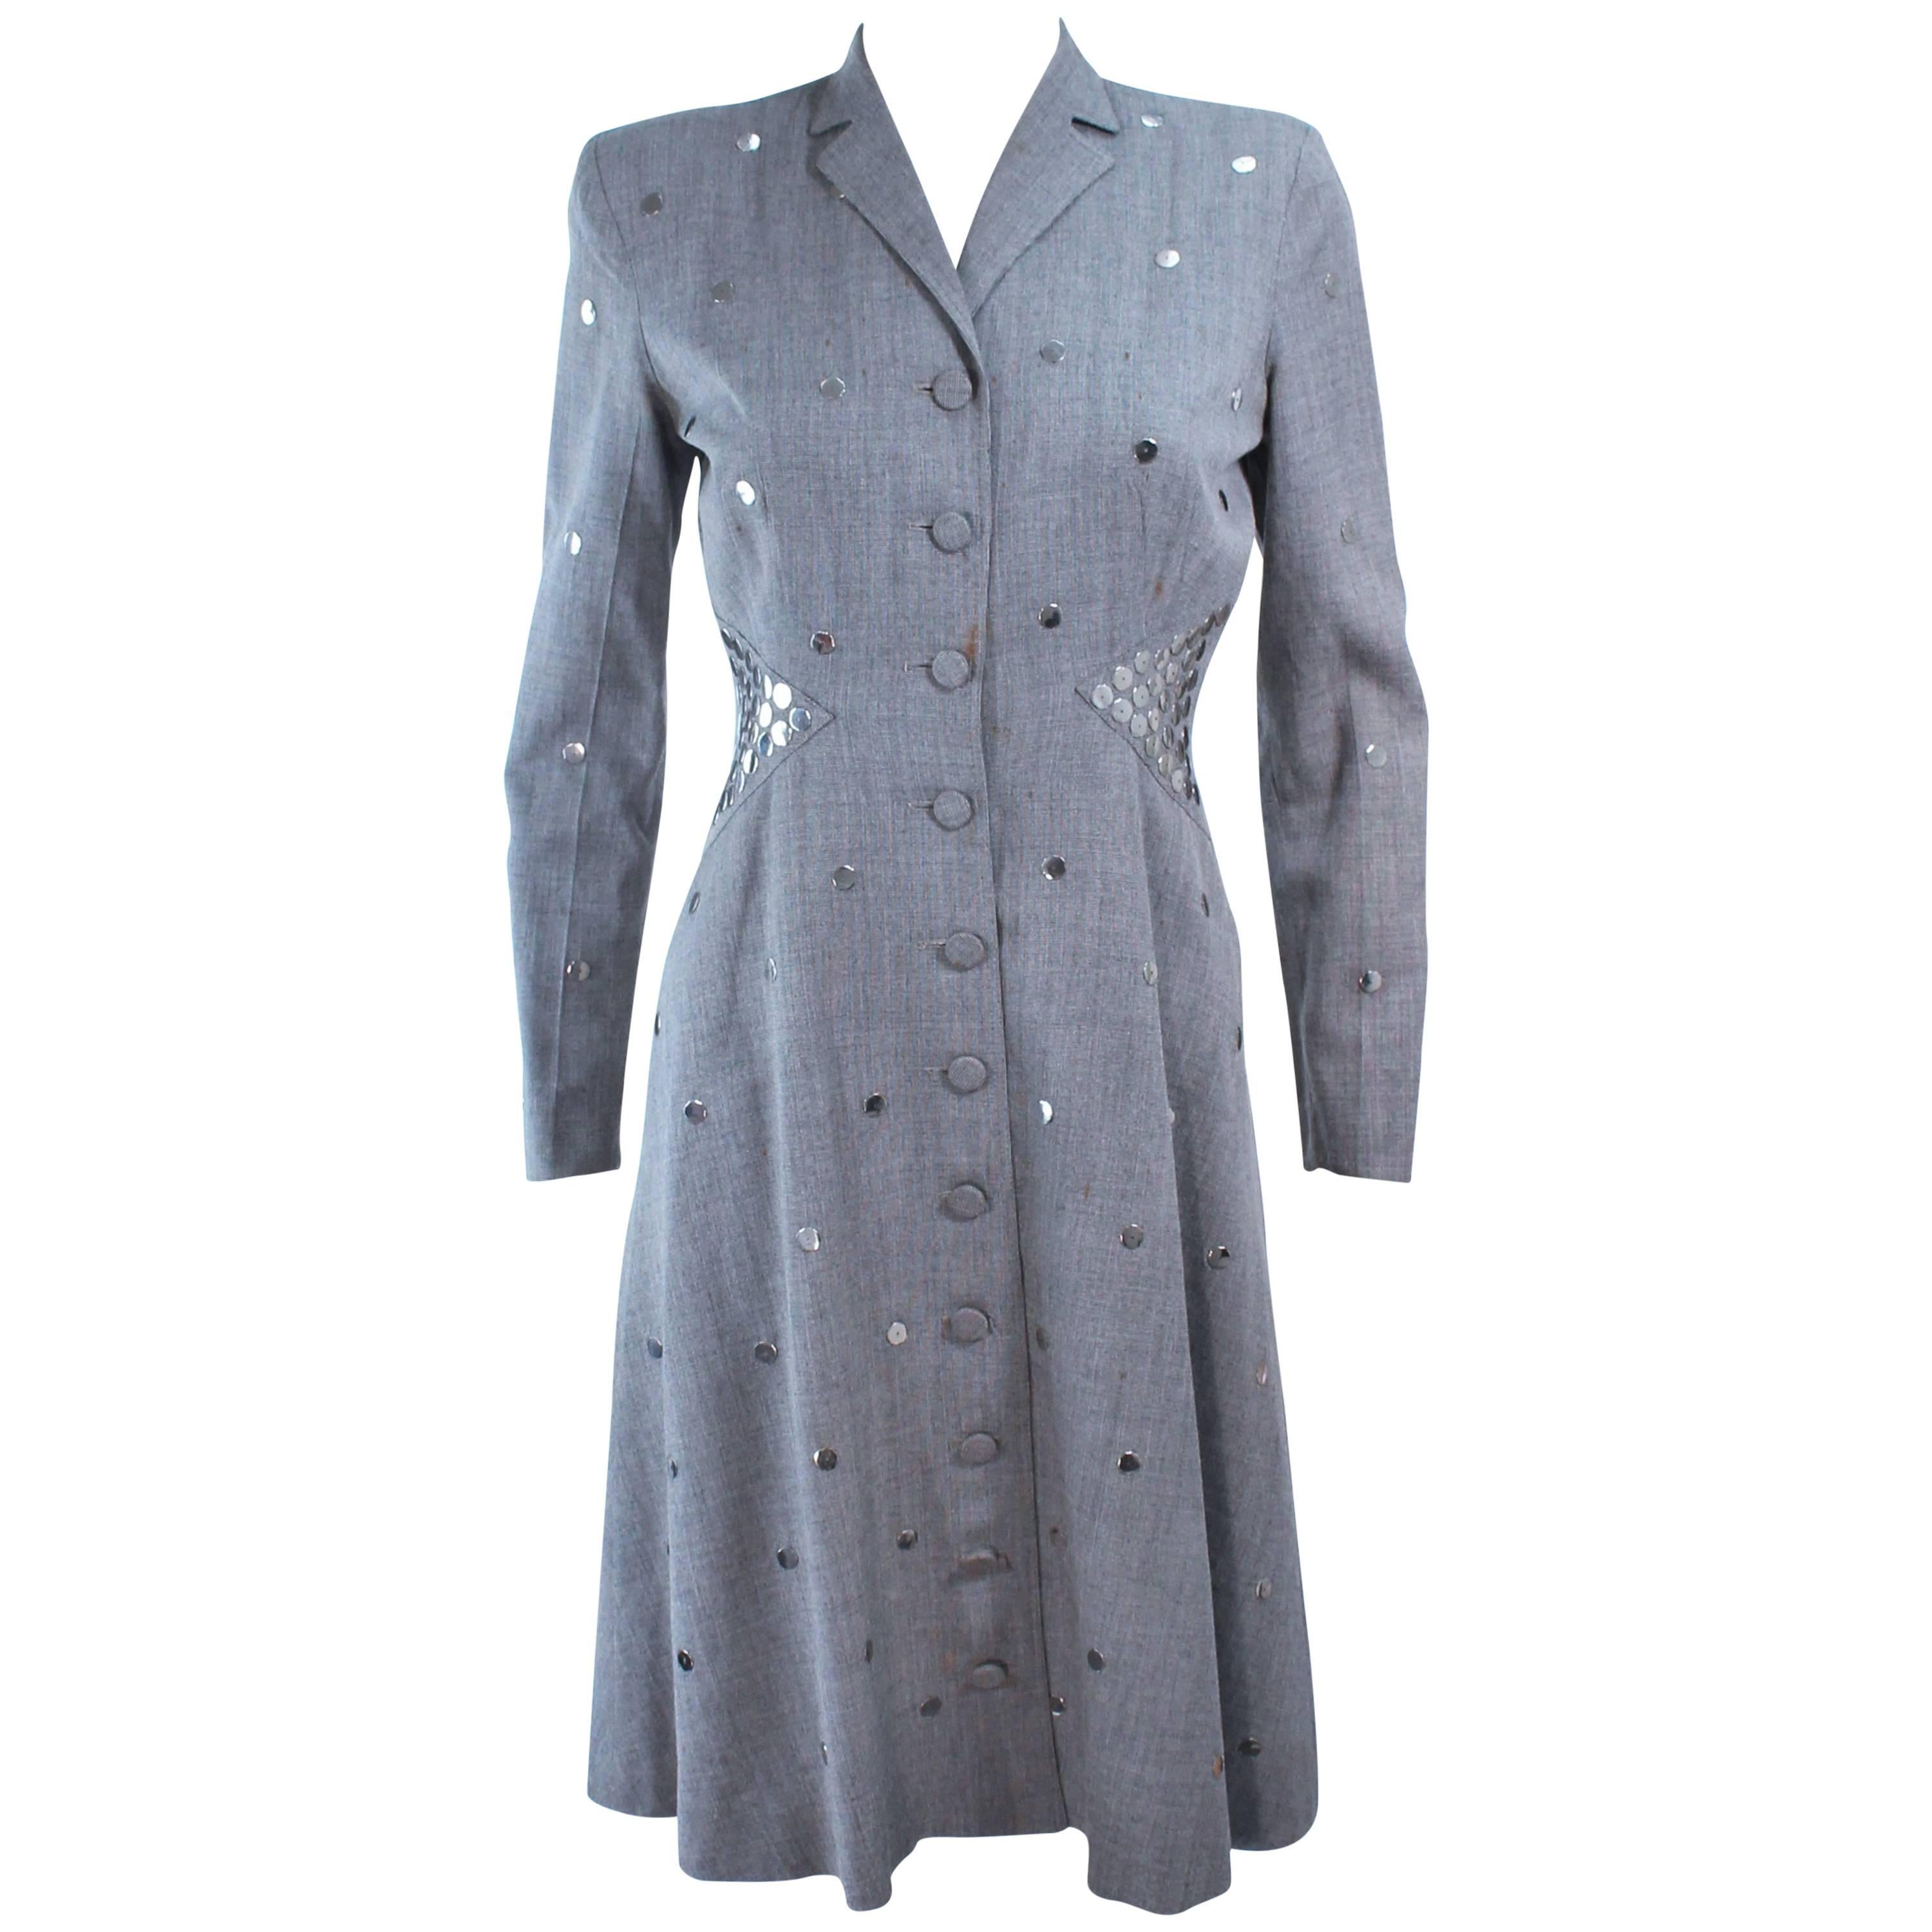 KAY COLLIER Grey Wool Coat Dress with Sequin Applique Size 2 4 For Sale